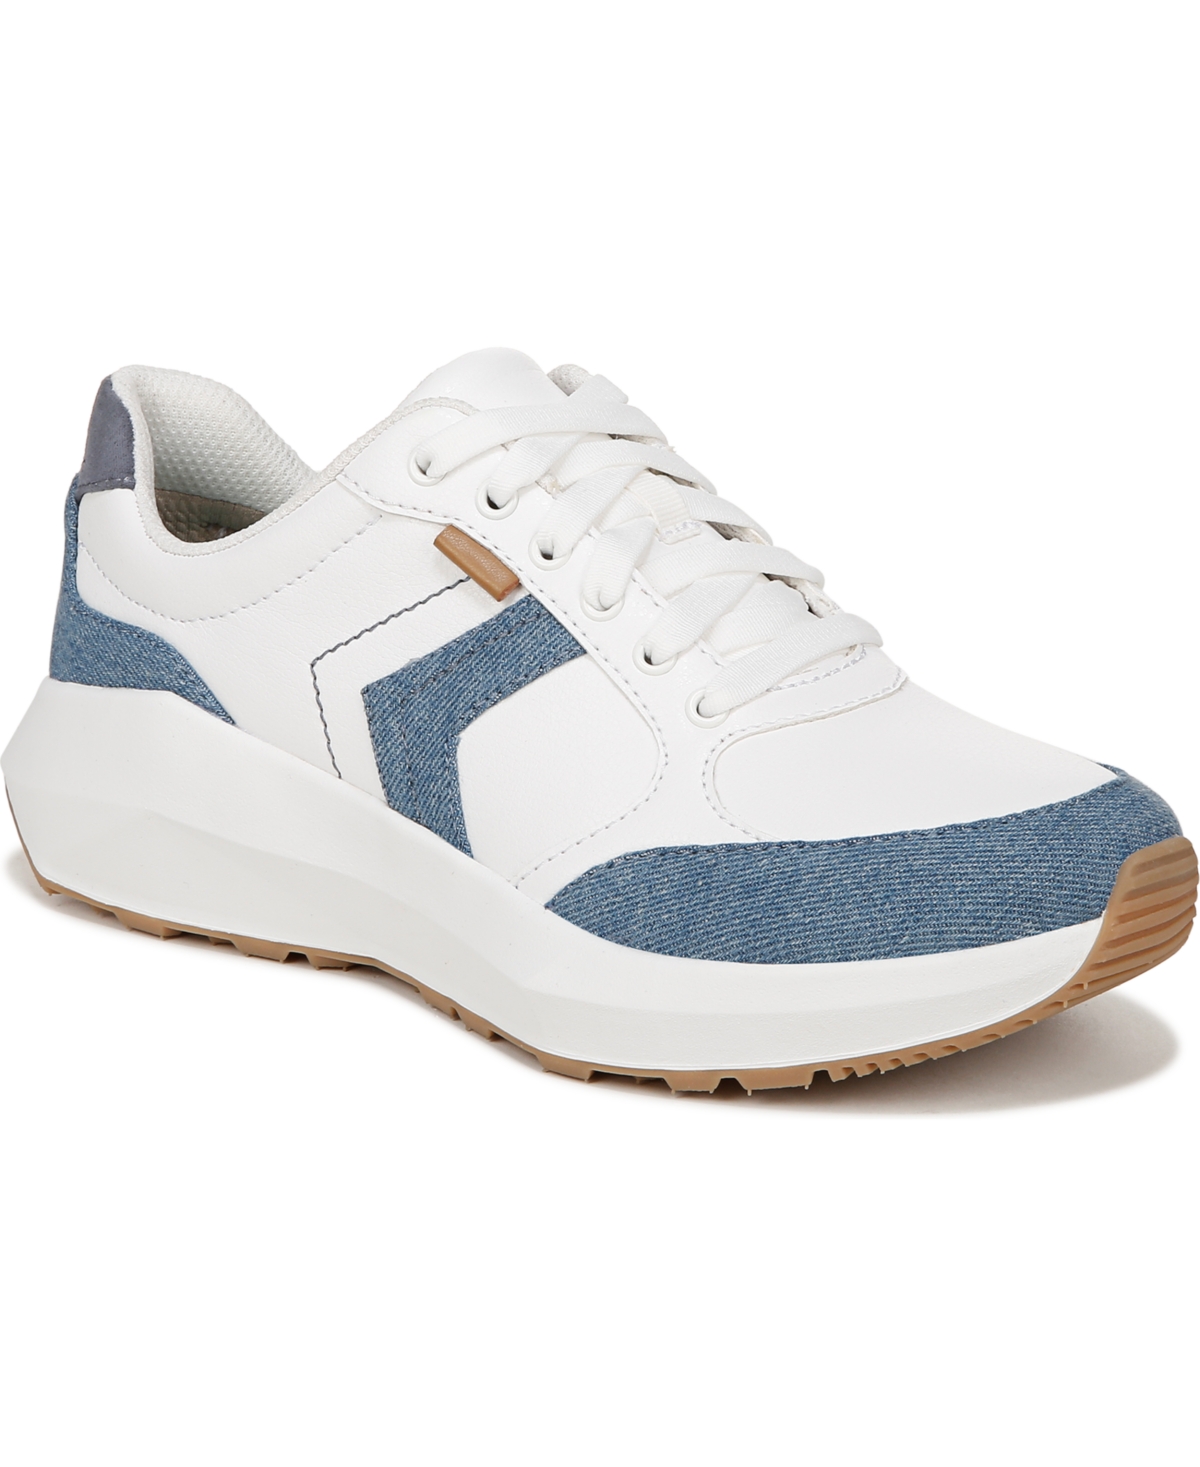 Women's Hannah Retro Sneakers - White/Blue Faux Leather/Fabric